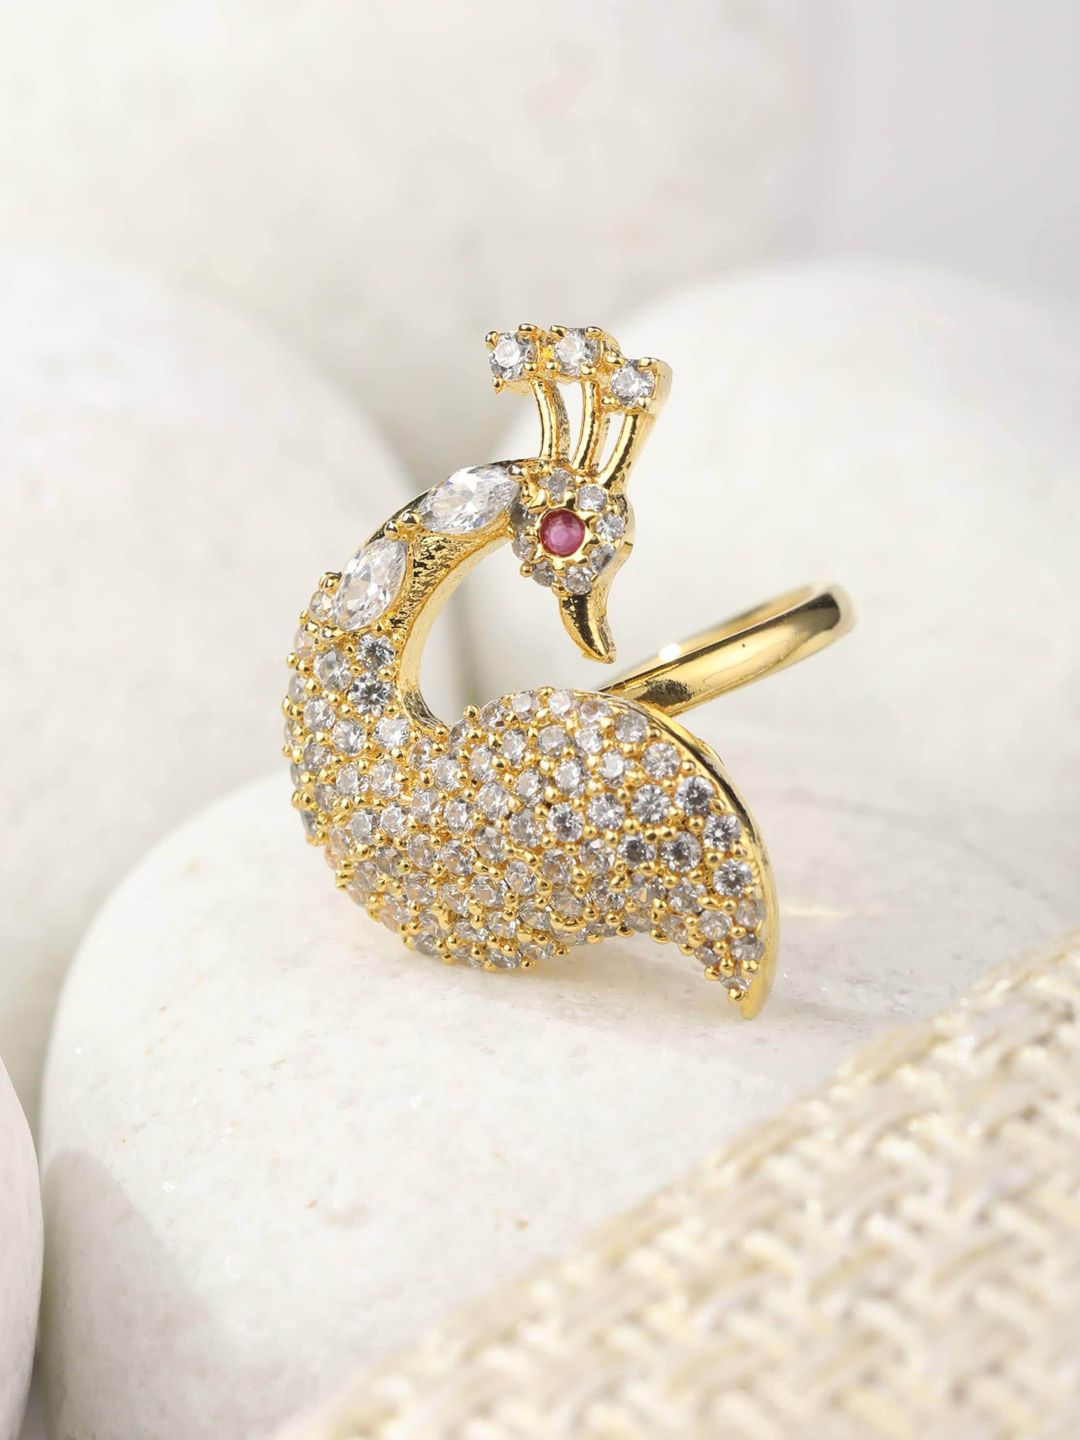 Priyaasi Gold-Plated White AD-Studded Peacock-Shaped Handcrafted Adjustable Finger Ring Price in India